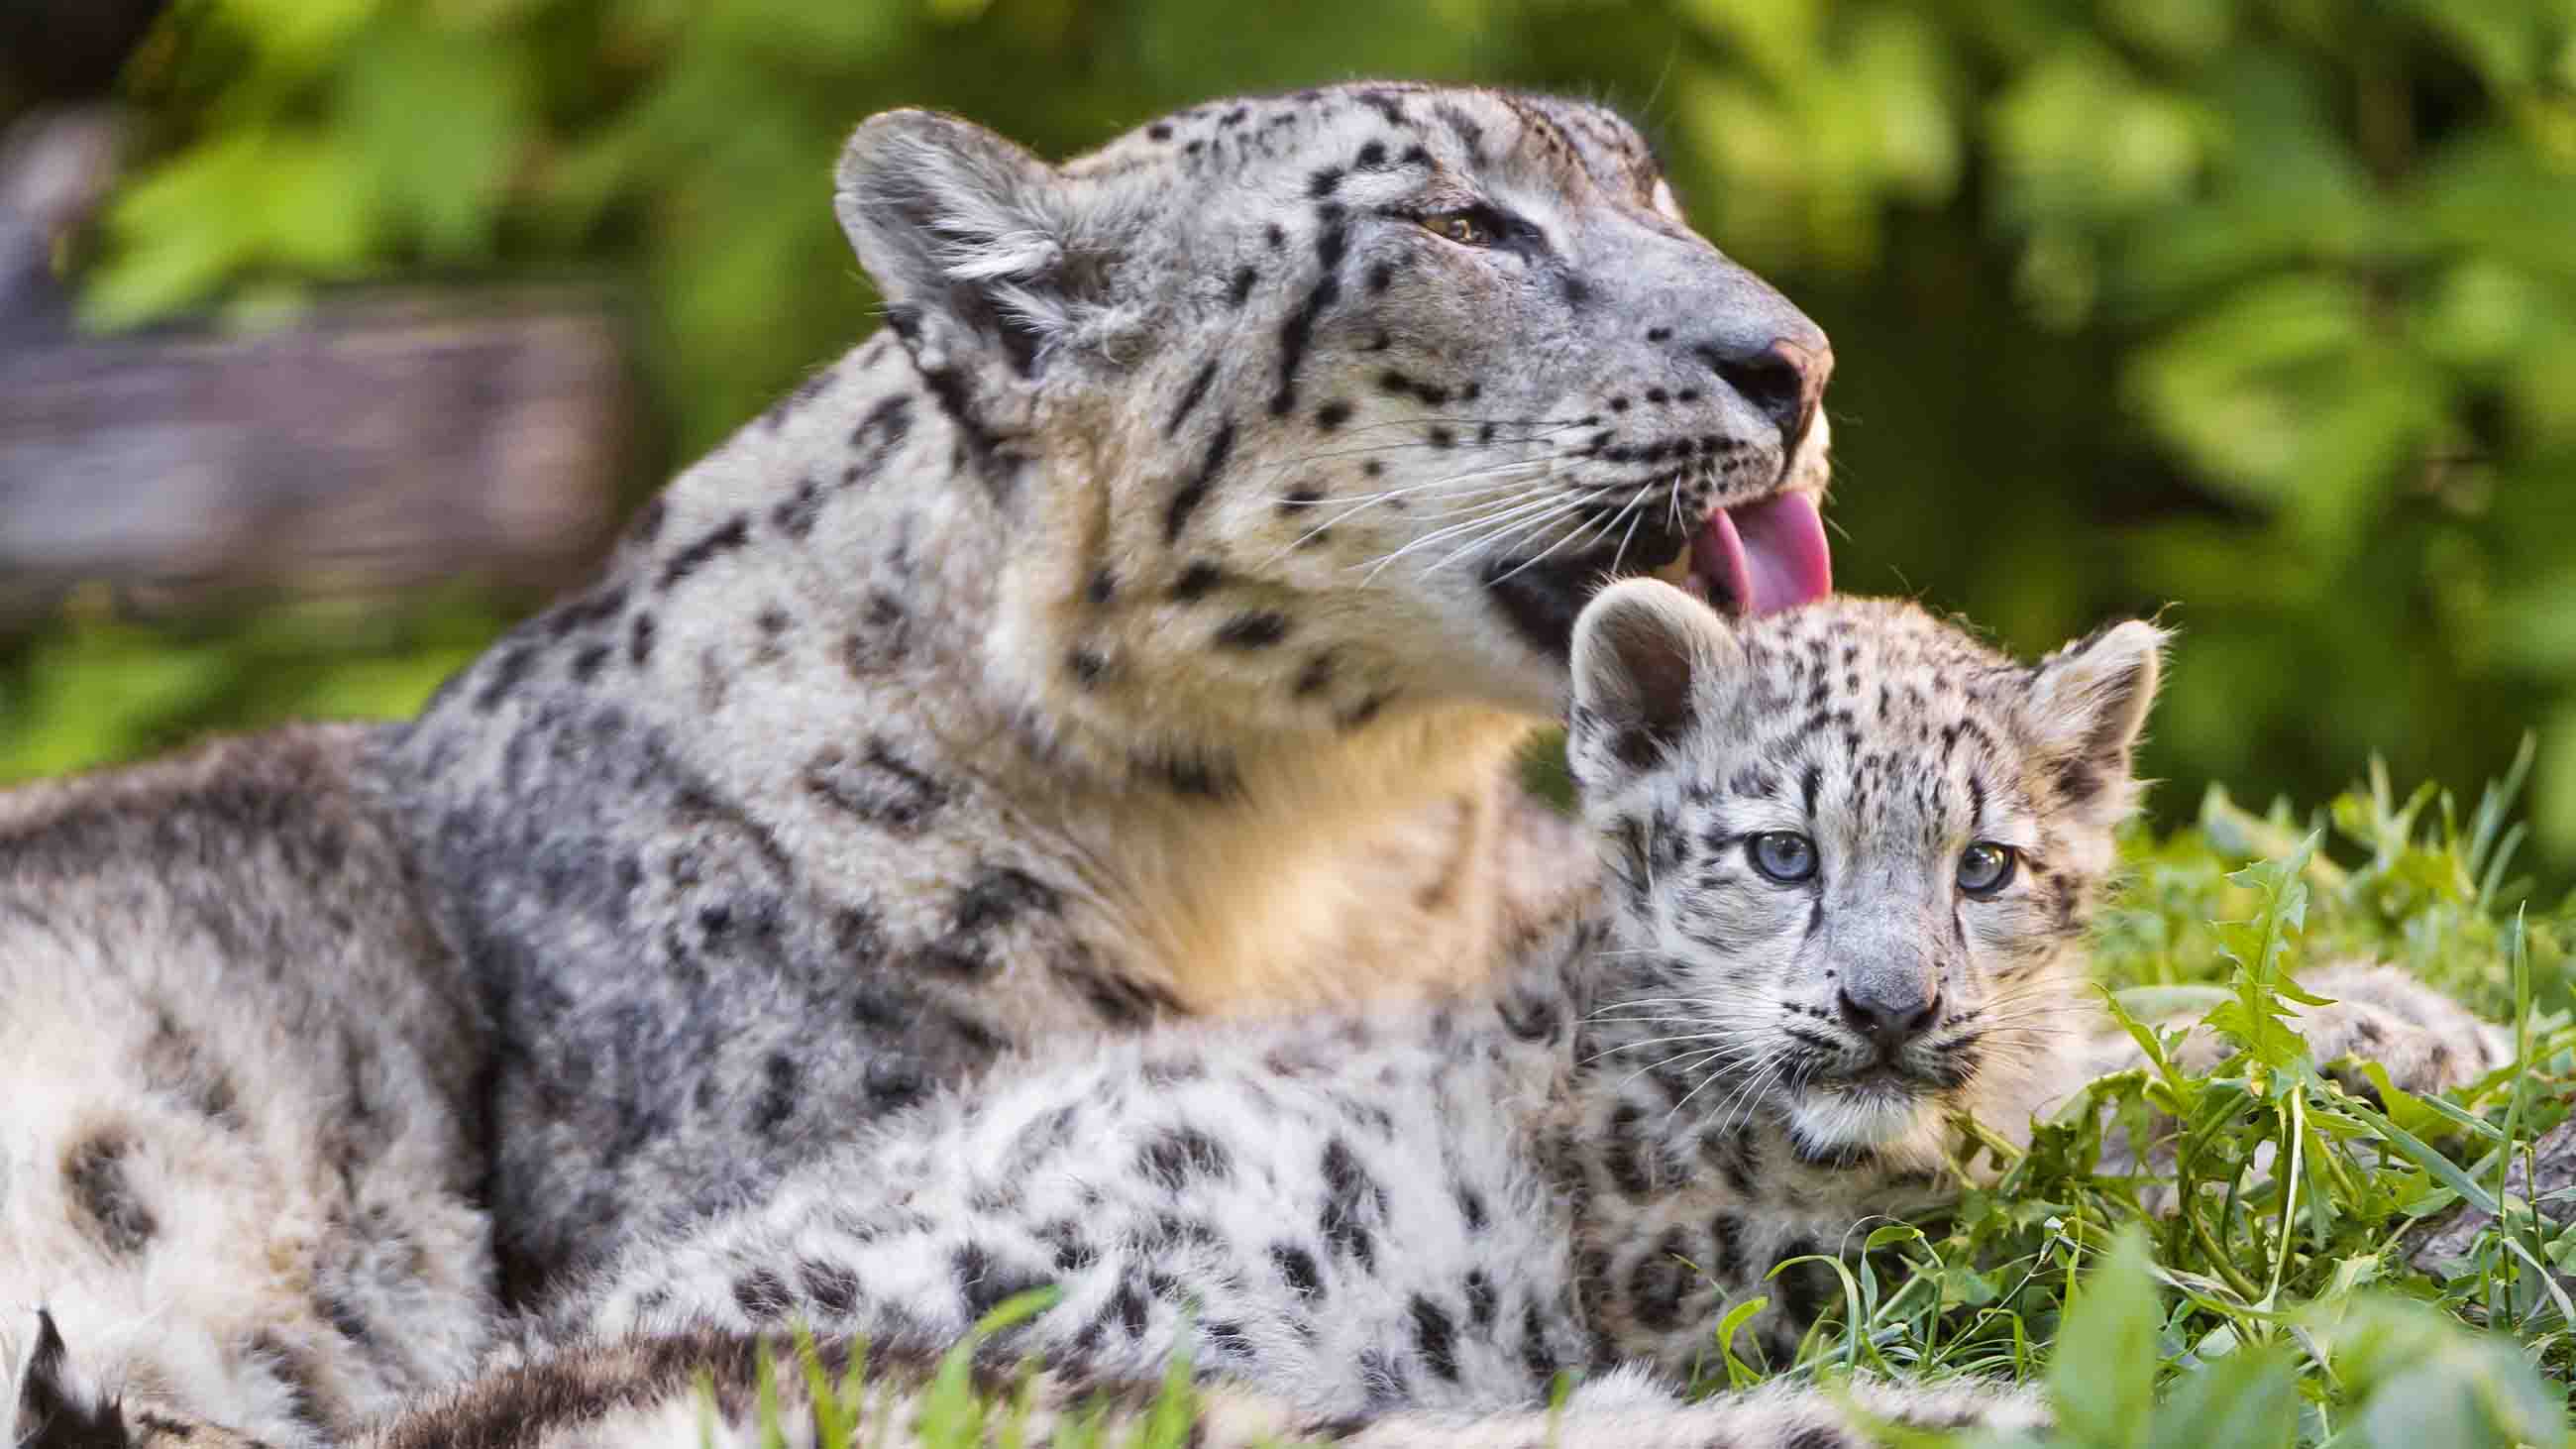 Conservationists warn that snow leopards still face a high risk of extinction in the wild.